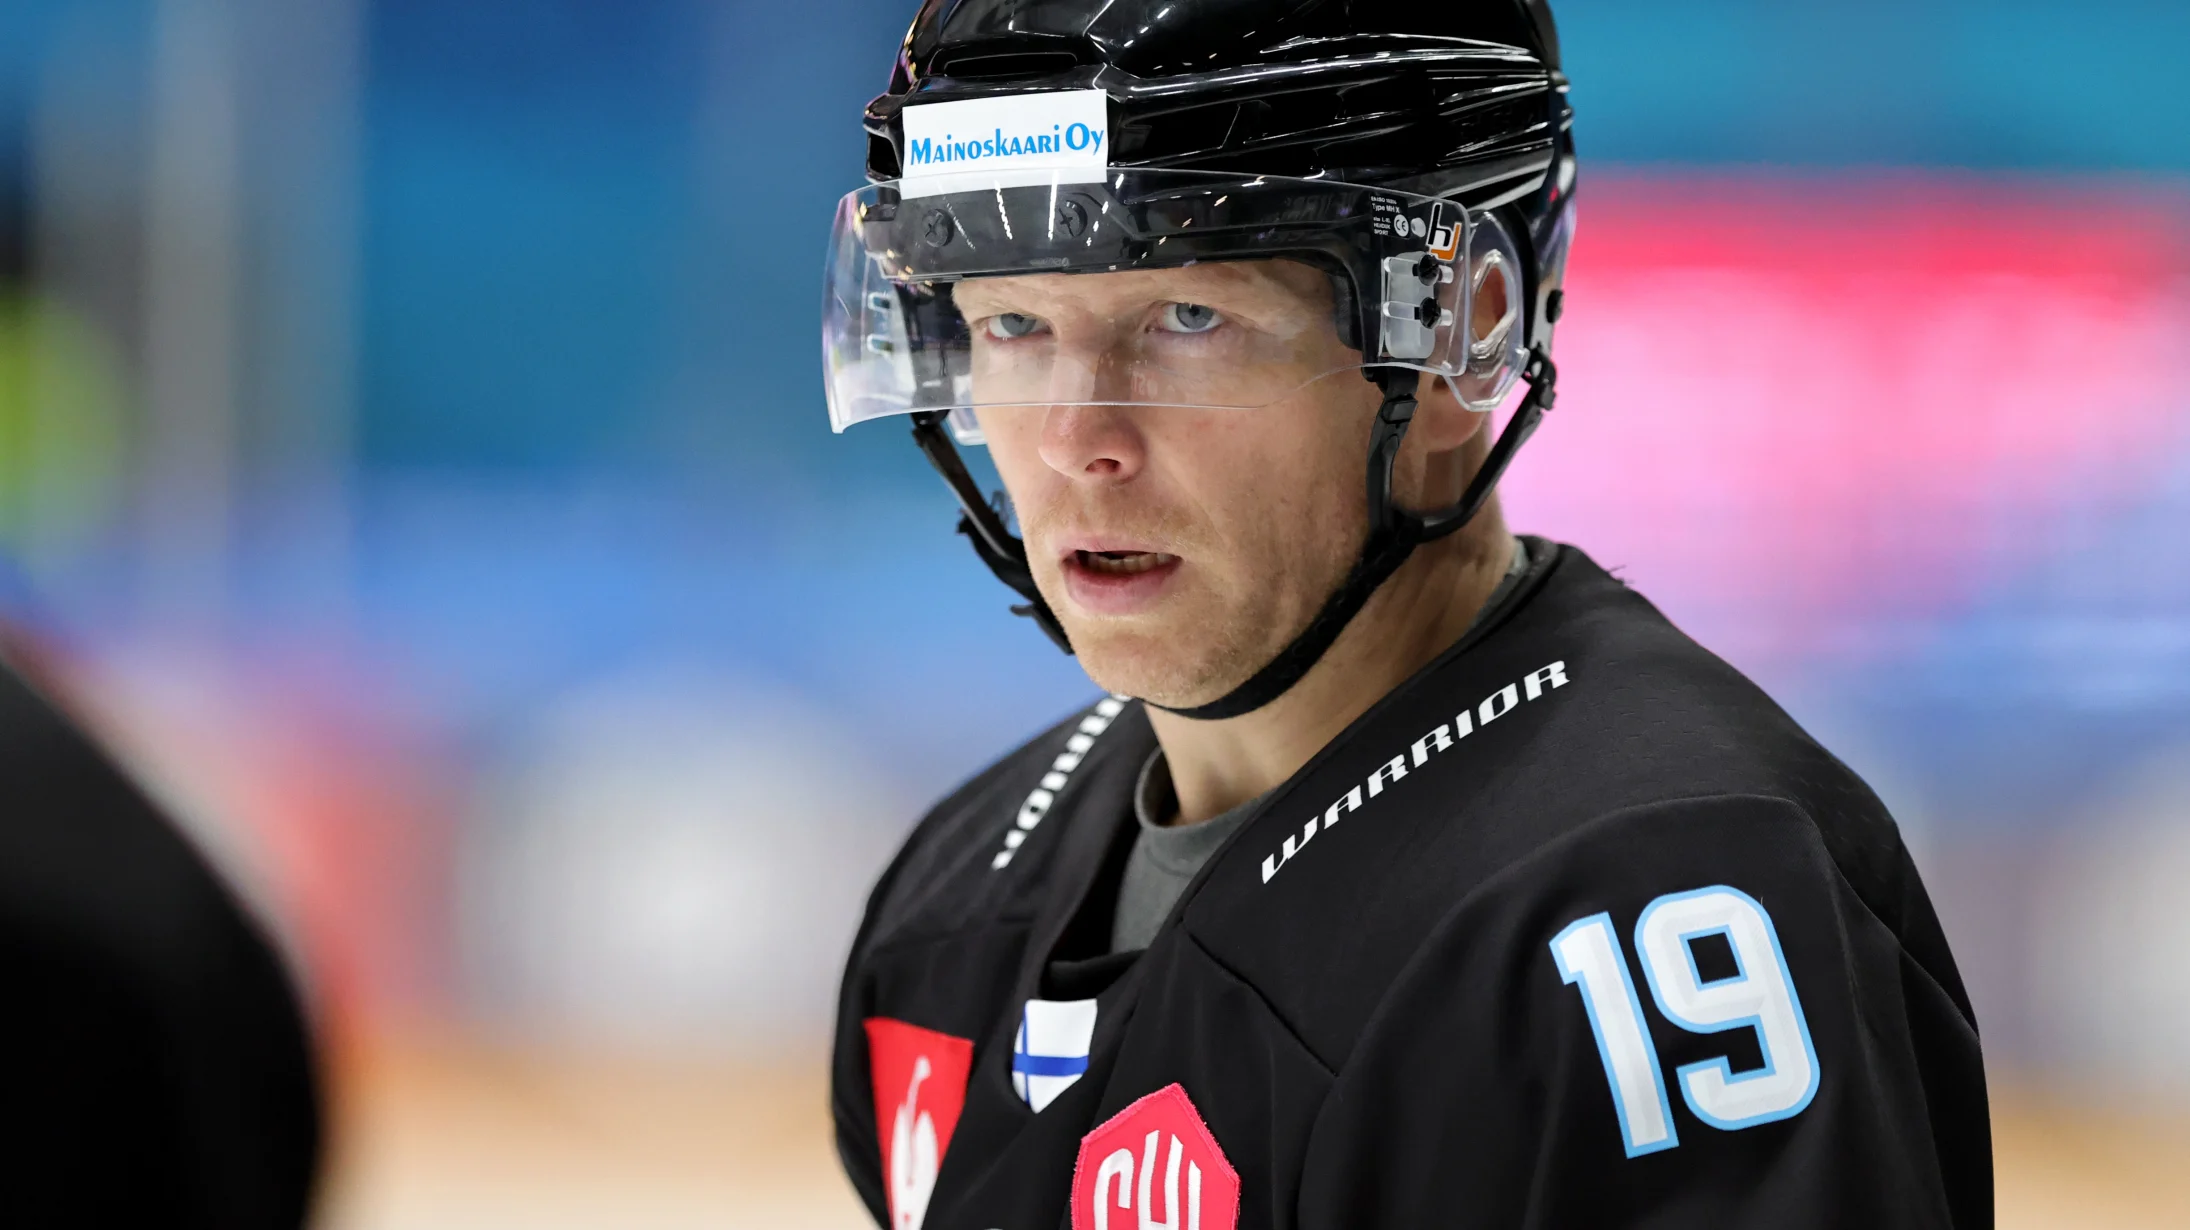 Lahti Pelicans - Champions Hockey League Shop powered by Warrior